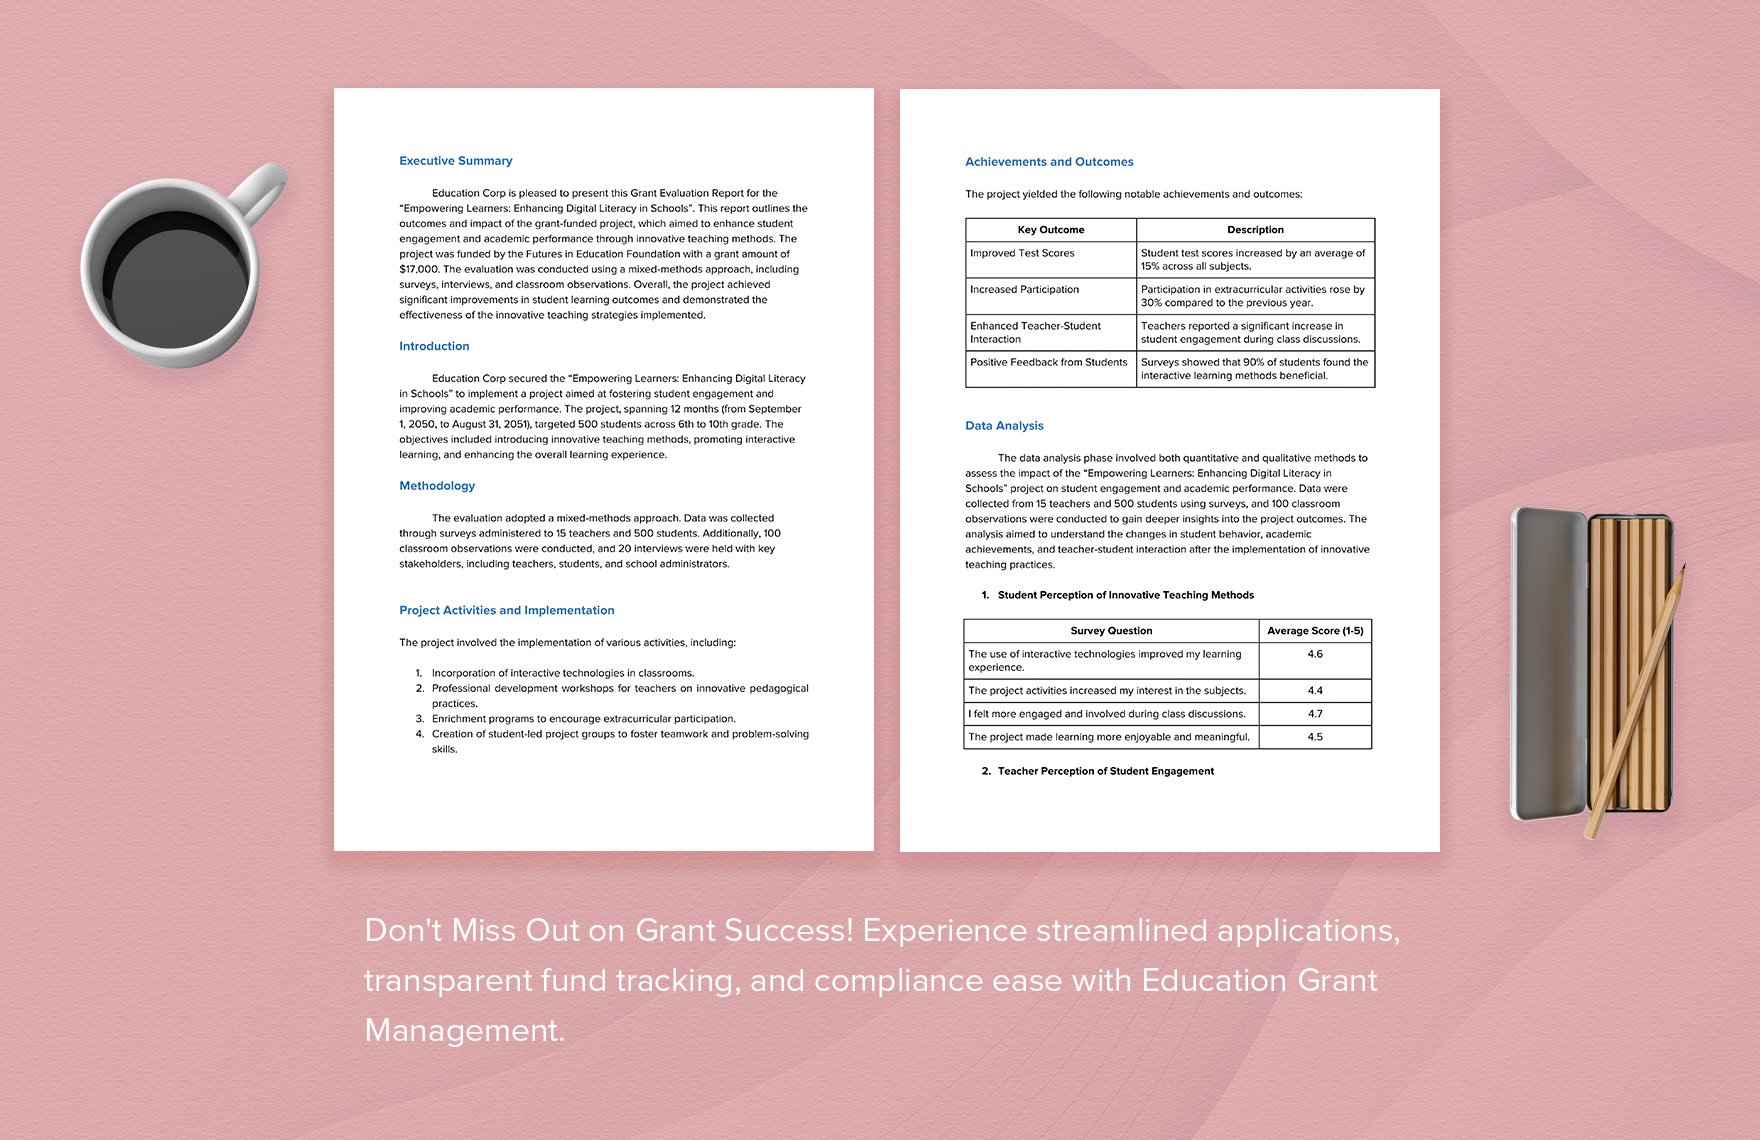 Education Grant Evaluation Report Template